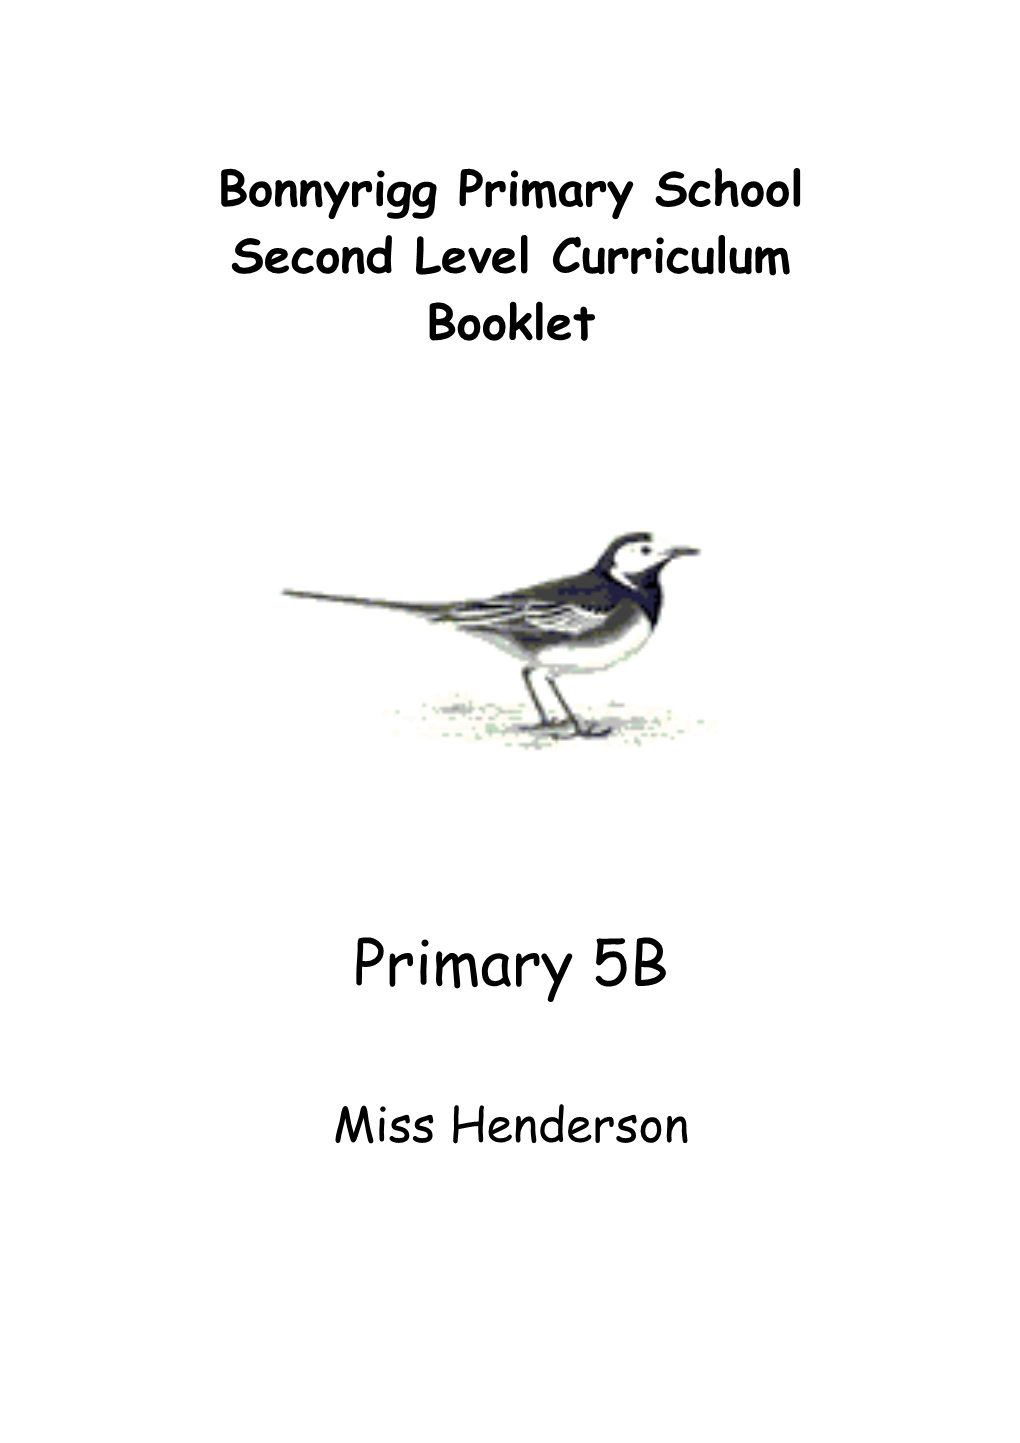 Second Level a Year in Bonnyrigg Primary School